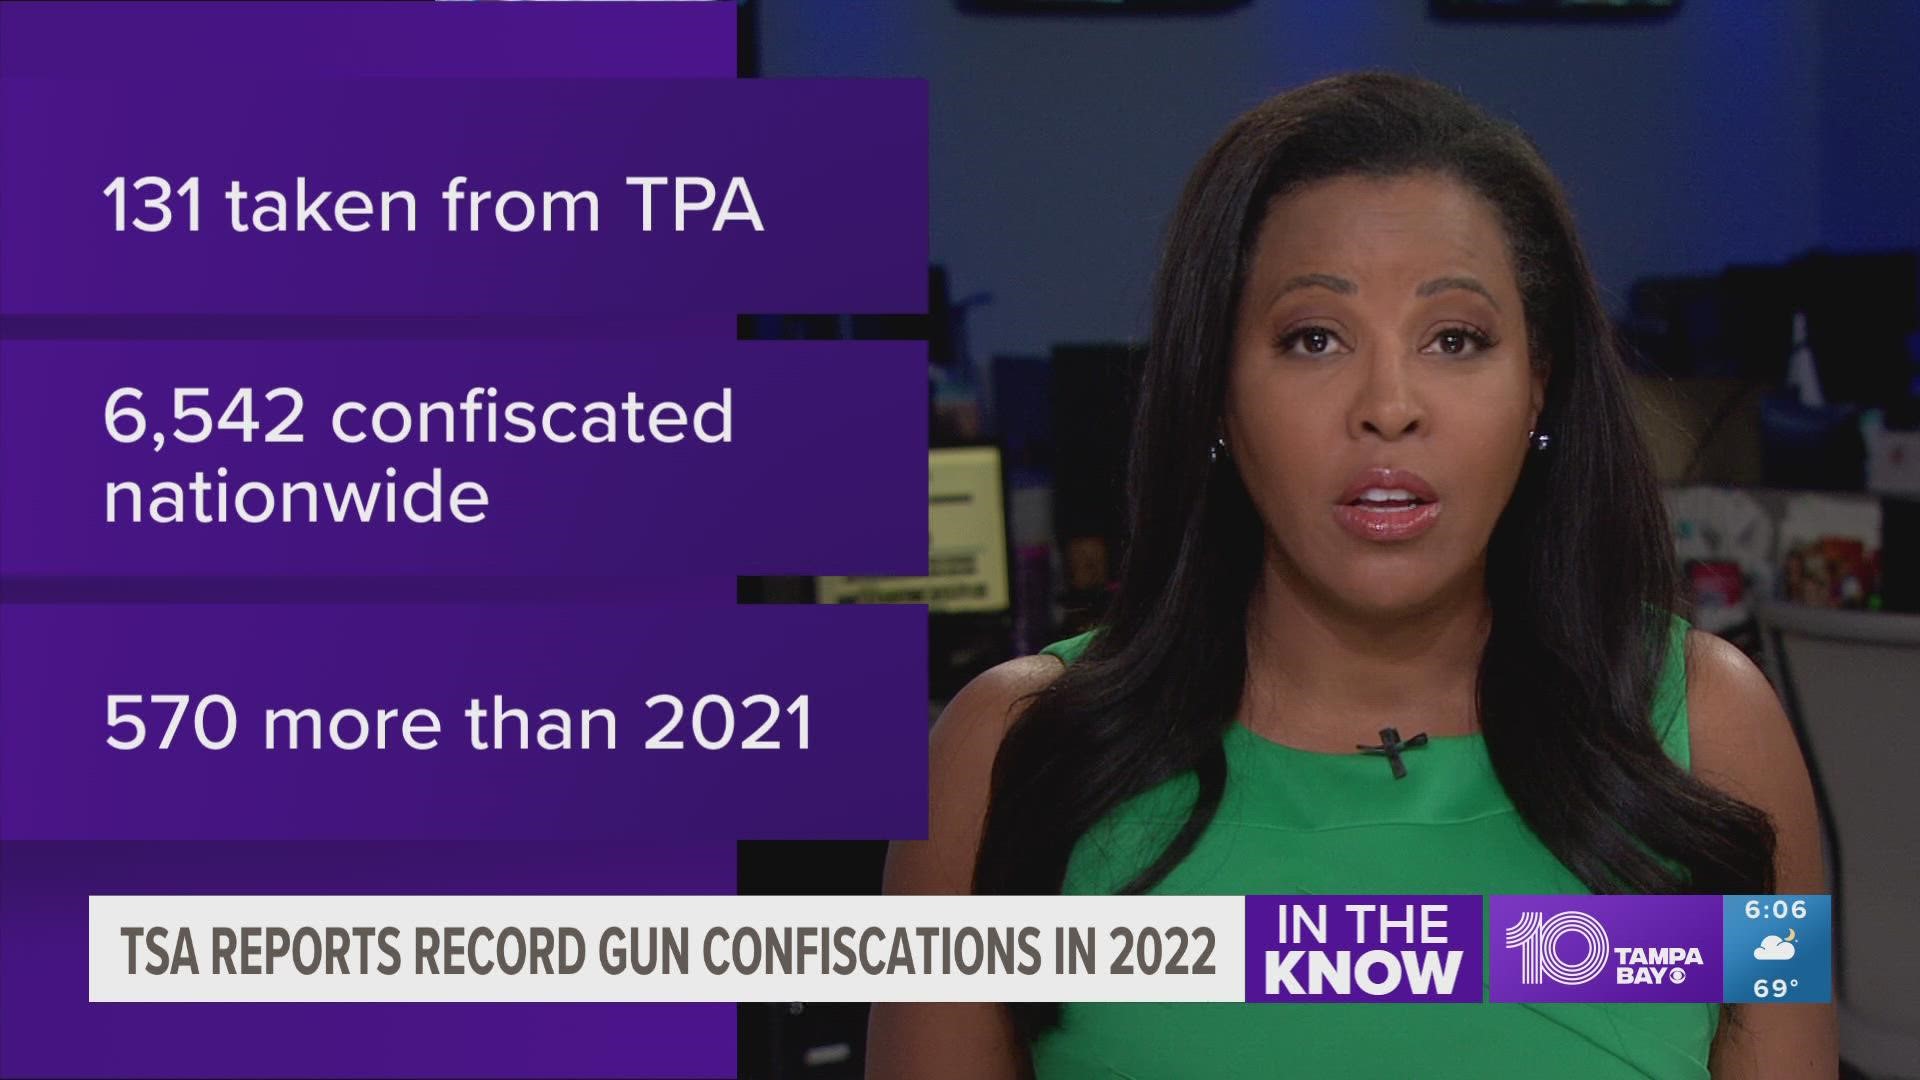 A new report from the TSA shows their officers confiscated a record number of guns at airport check-points in 2022.